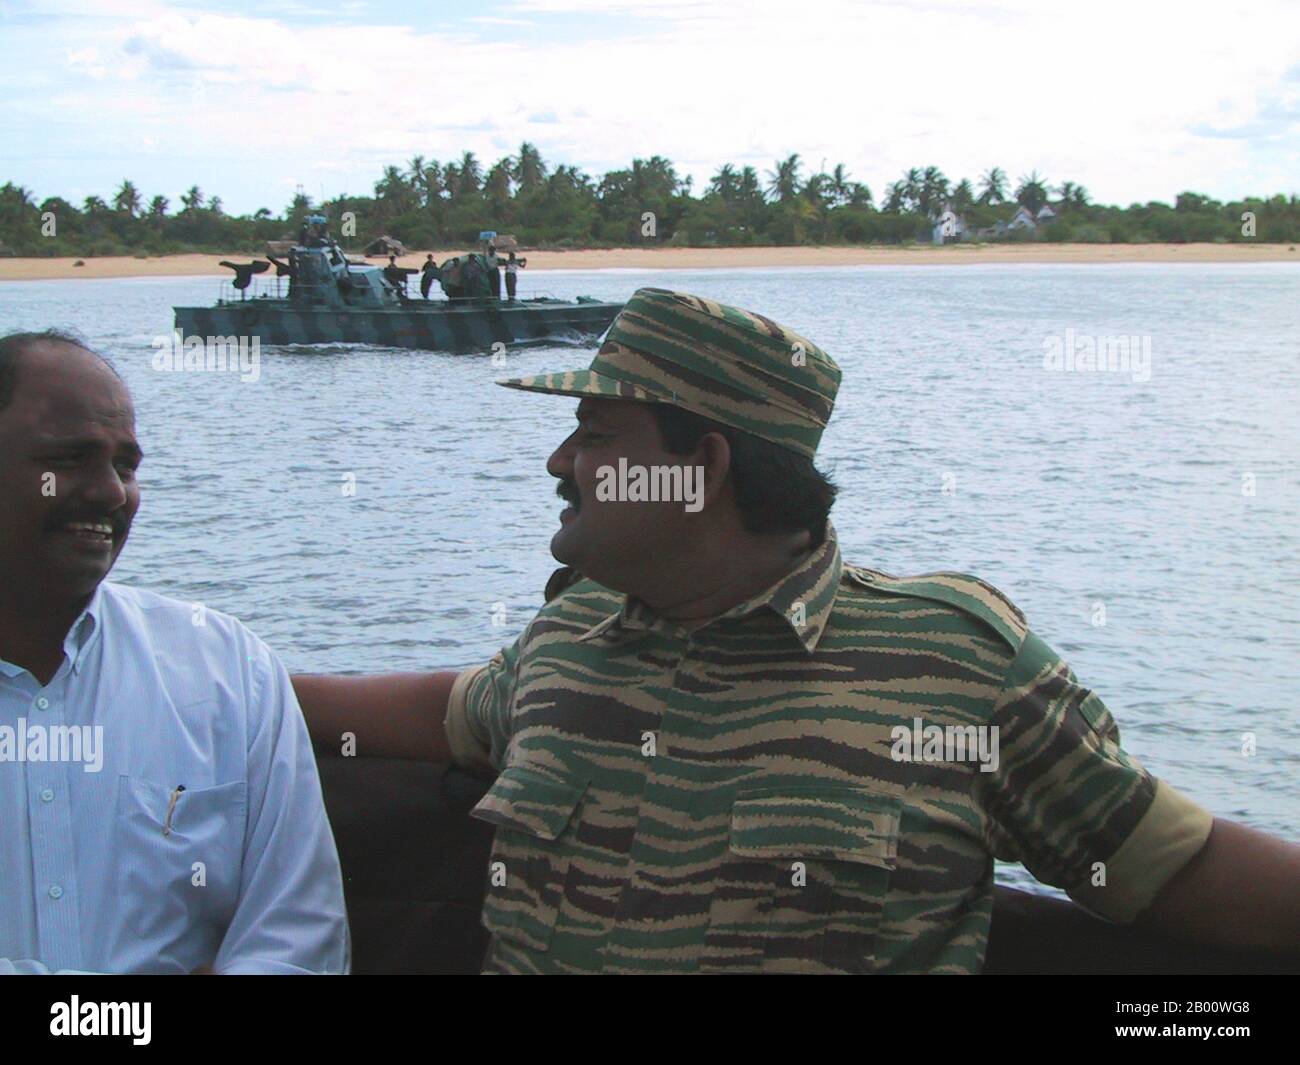 Sri Lanka: Colonel Soosai, head of the LTTE Sea Tigers, on a fast attack craft at Mullaitivu, 2003.  Thillaiyampalam Sivanesan (October 16, 1963  - May 18, 2009), also known by his nom de guerre, Colonel Soosai, was the head of the Sea Tigers, the naval wing of the Liberation Tigers of Tamil Eelam. He was killed by the Sri Lankan Army on May 18, 2009. Image taken by Isak Berntsen and released into the Public Domain. Stock Photo